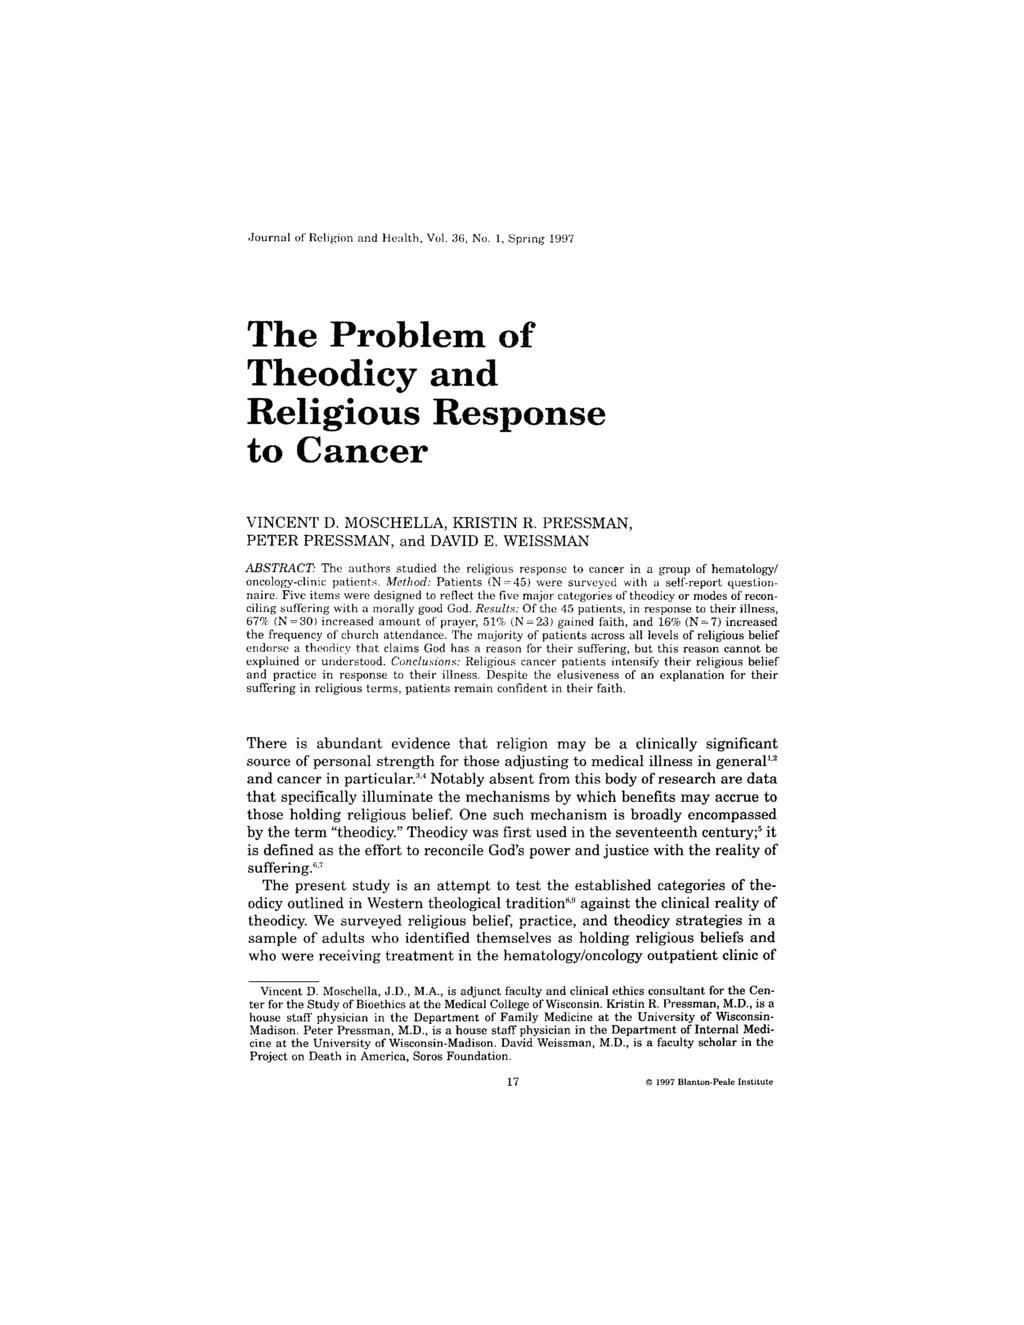 Journal of Religion and Health, Vol. 36, No. 1, Spring 1997 The Problem of Theodicy and Religious Response to Cancer VINCENT D. MOSCHELLA, KRISTIN R. PRESSMAN, PETER PRESSMAN, and DAVID E.